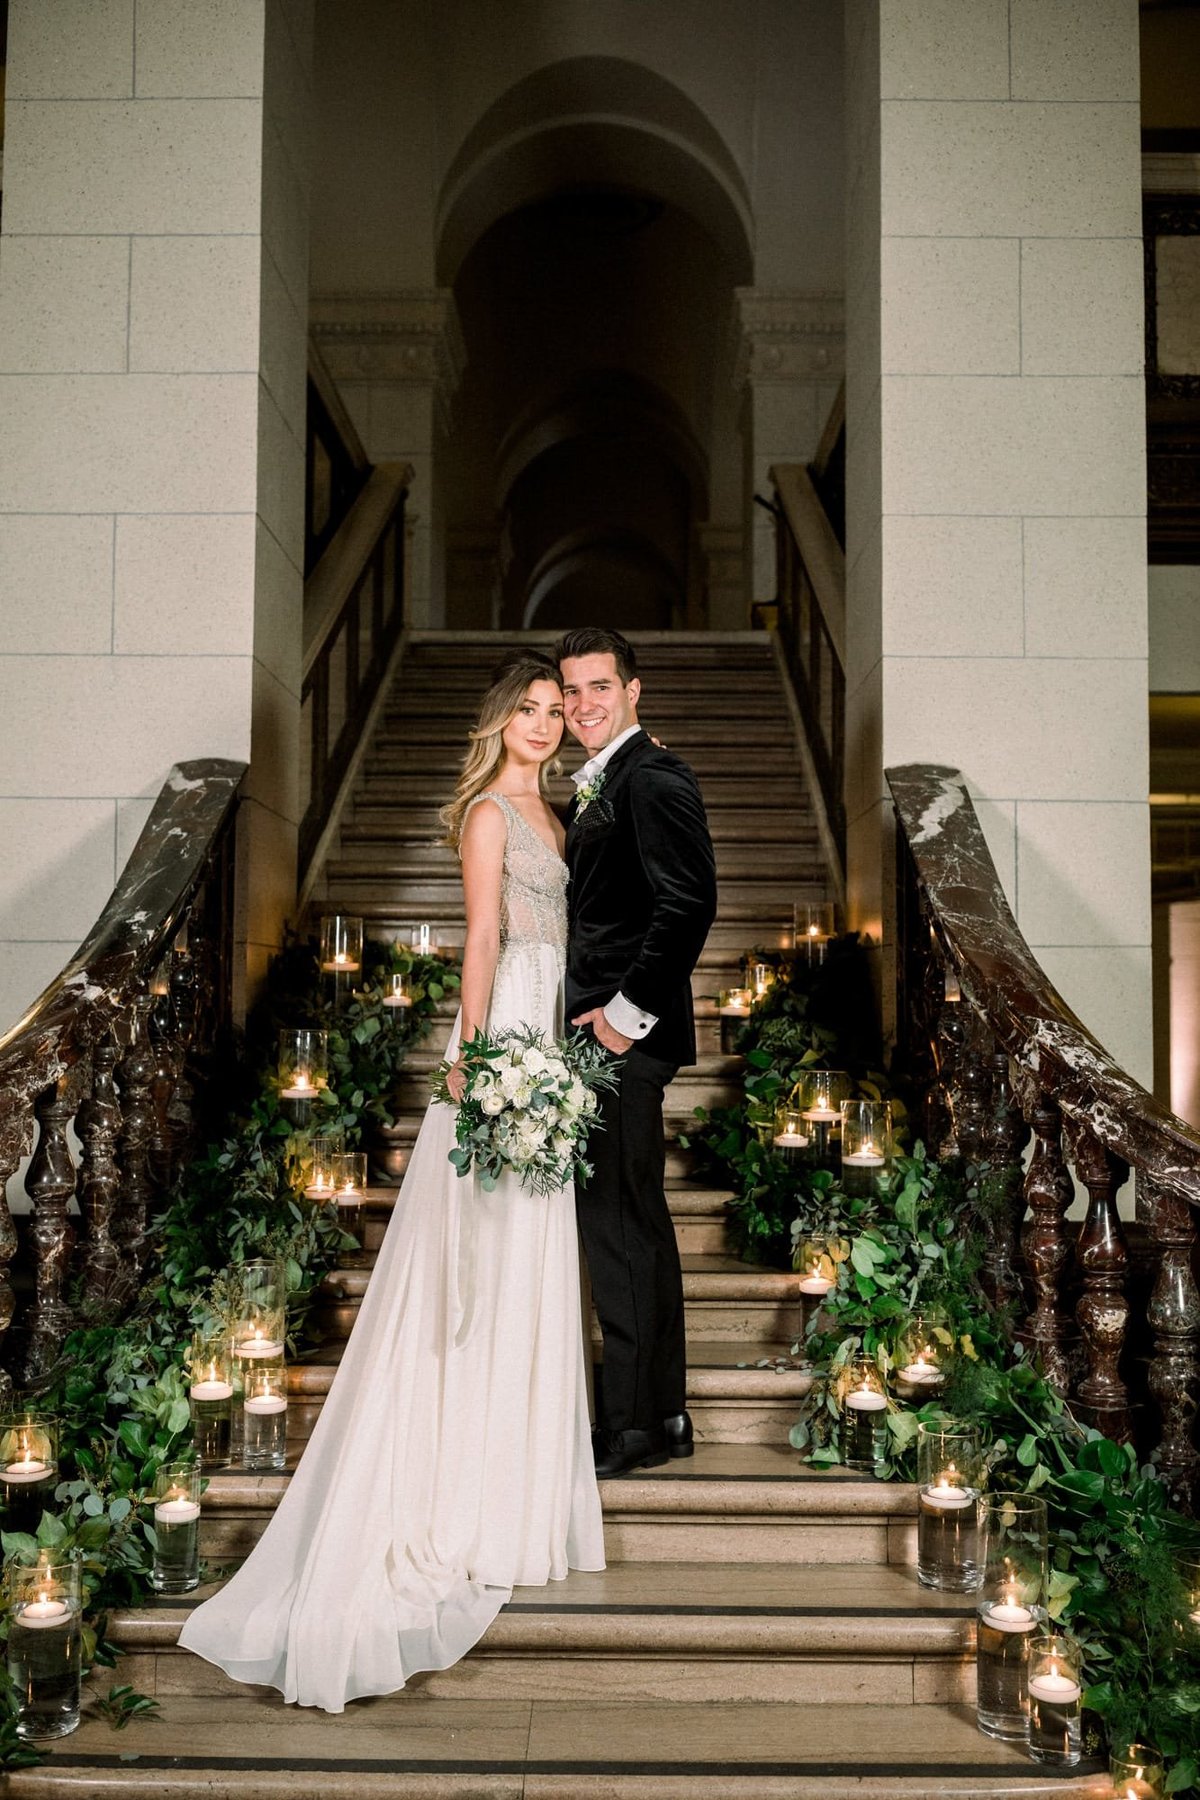 Bride and Groom pose together on a decorated staircase at The Majestic in Los Angeles